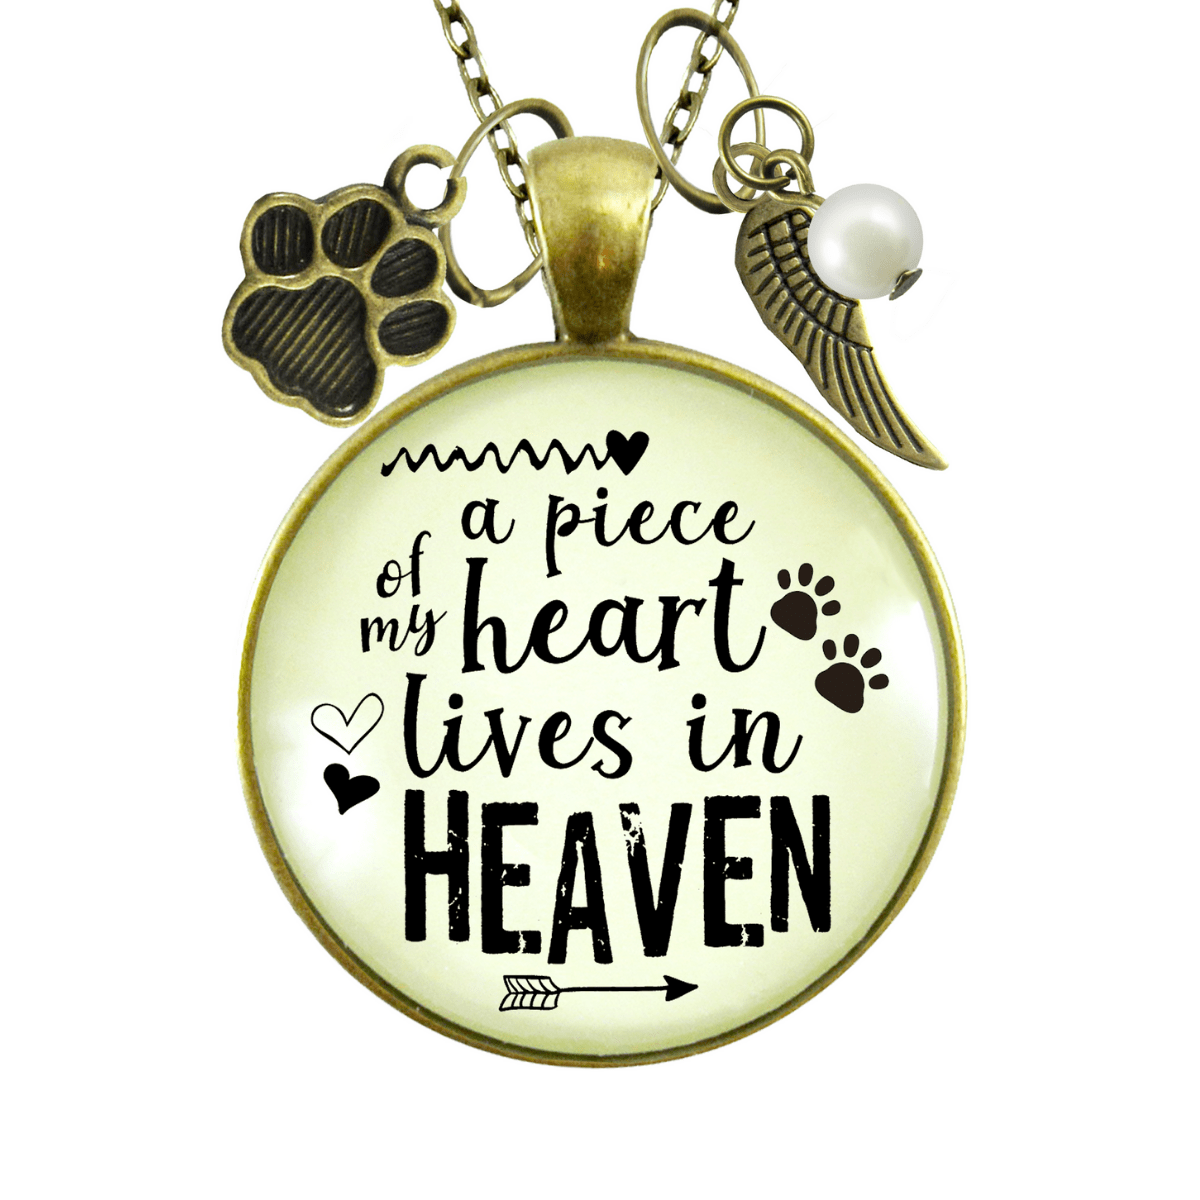 Gutsy Goodness Pet Memorial Necklace Piece of Heart Angel Wing Paw Charm Jewelry - Gutsy Goodness Handmade Jewelry;Pet Memorial Necklace Piece Of Heart Angel Wing Paw Charm Jewelry - Gutsy Goodness Handmade Jewelry Gifts